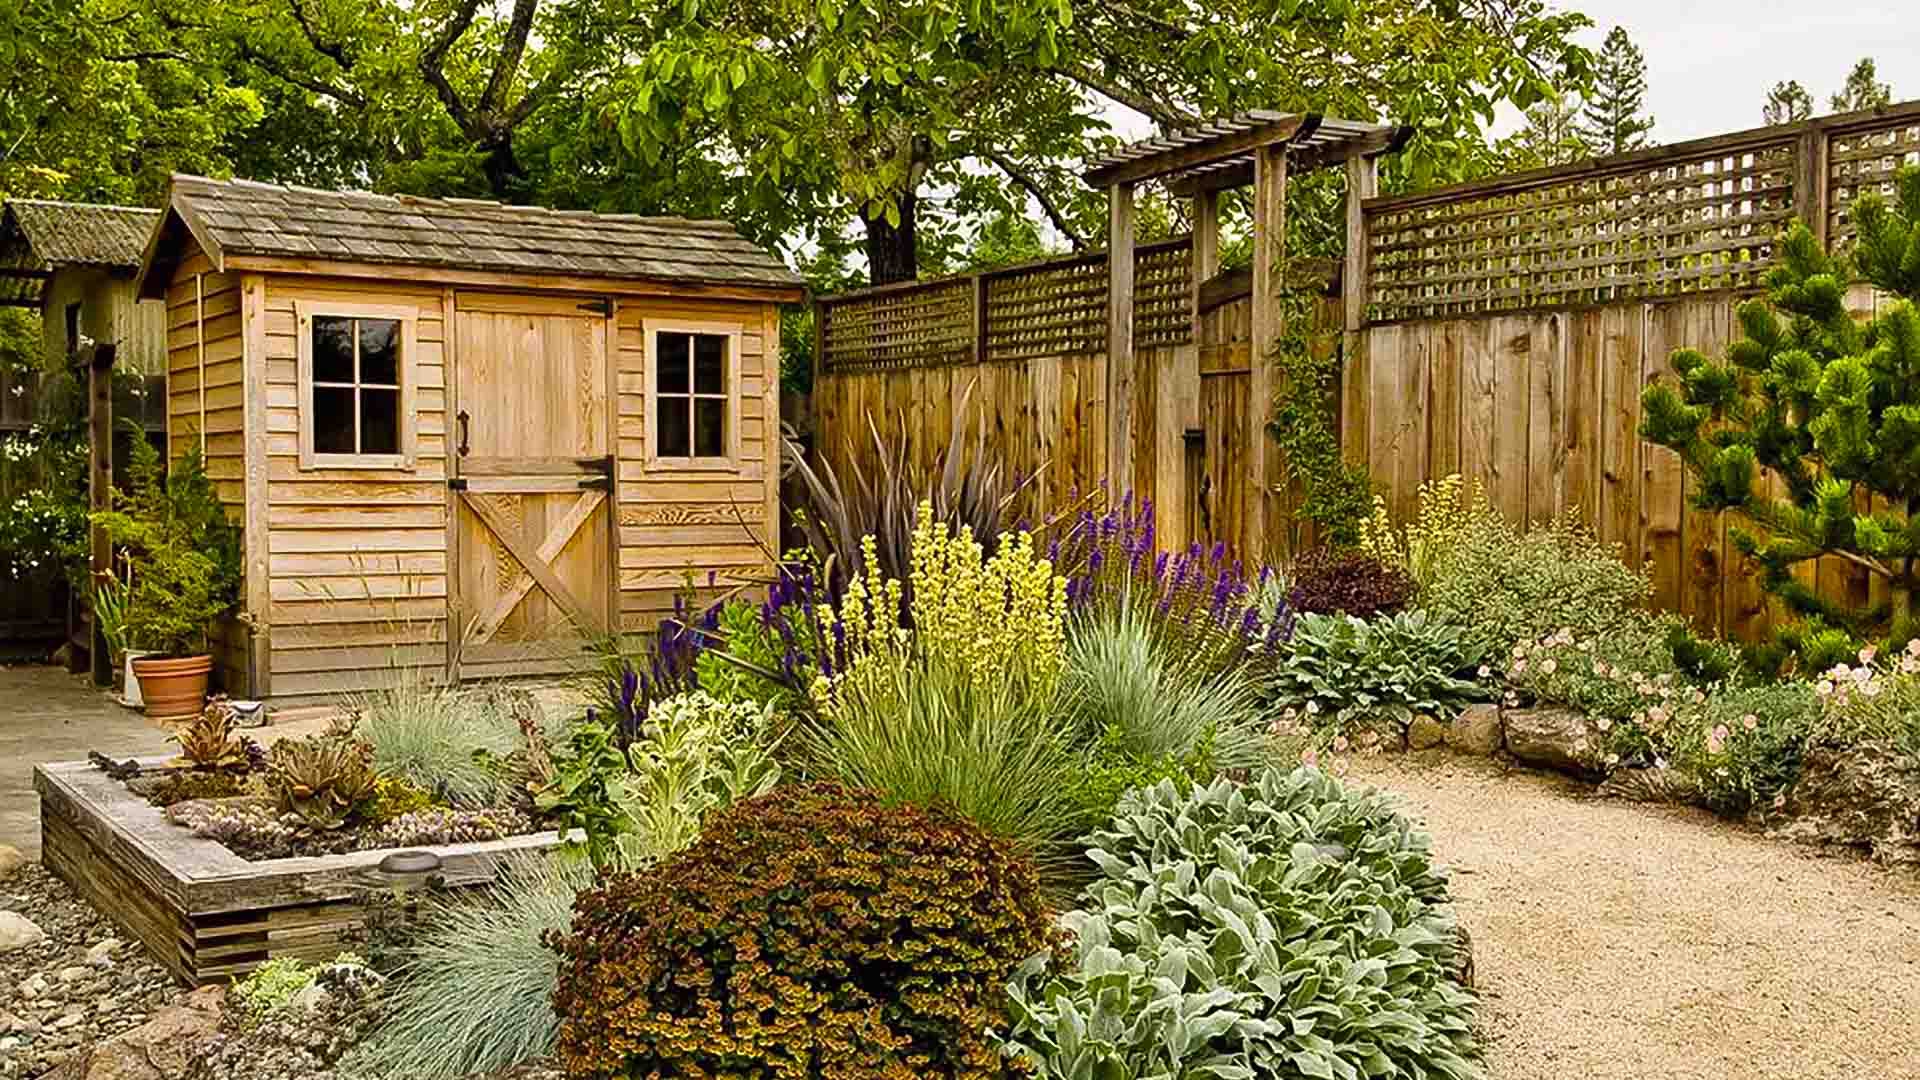 Sun Rise Sheds | What Do I Need To Think About Before Getting A Potting Shed?